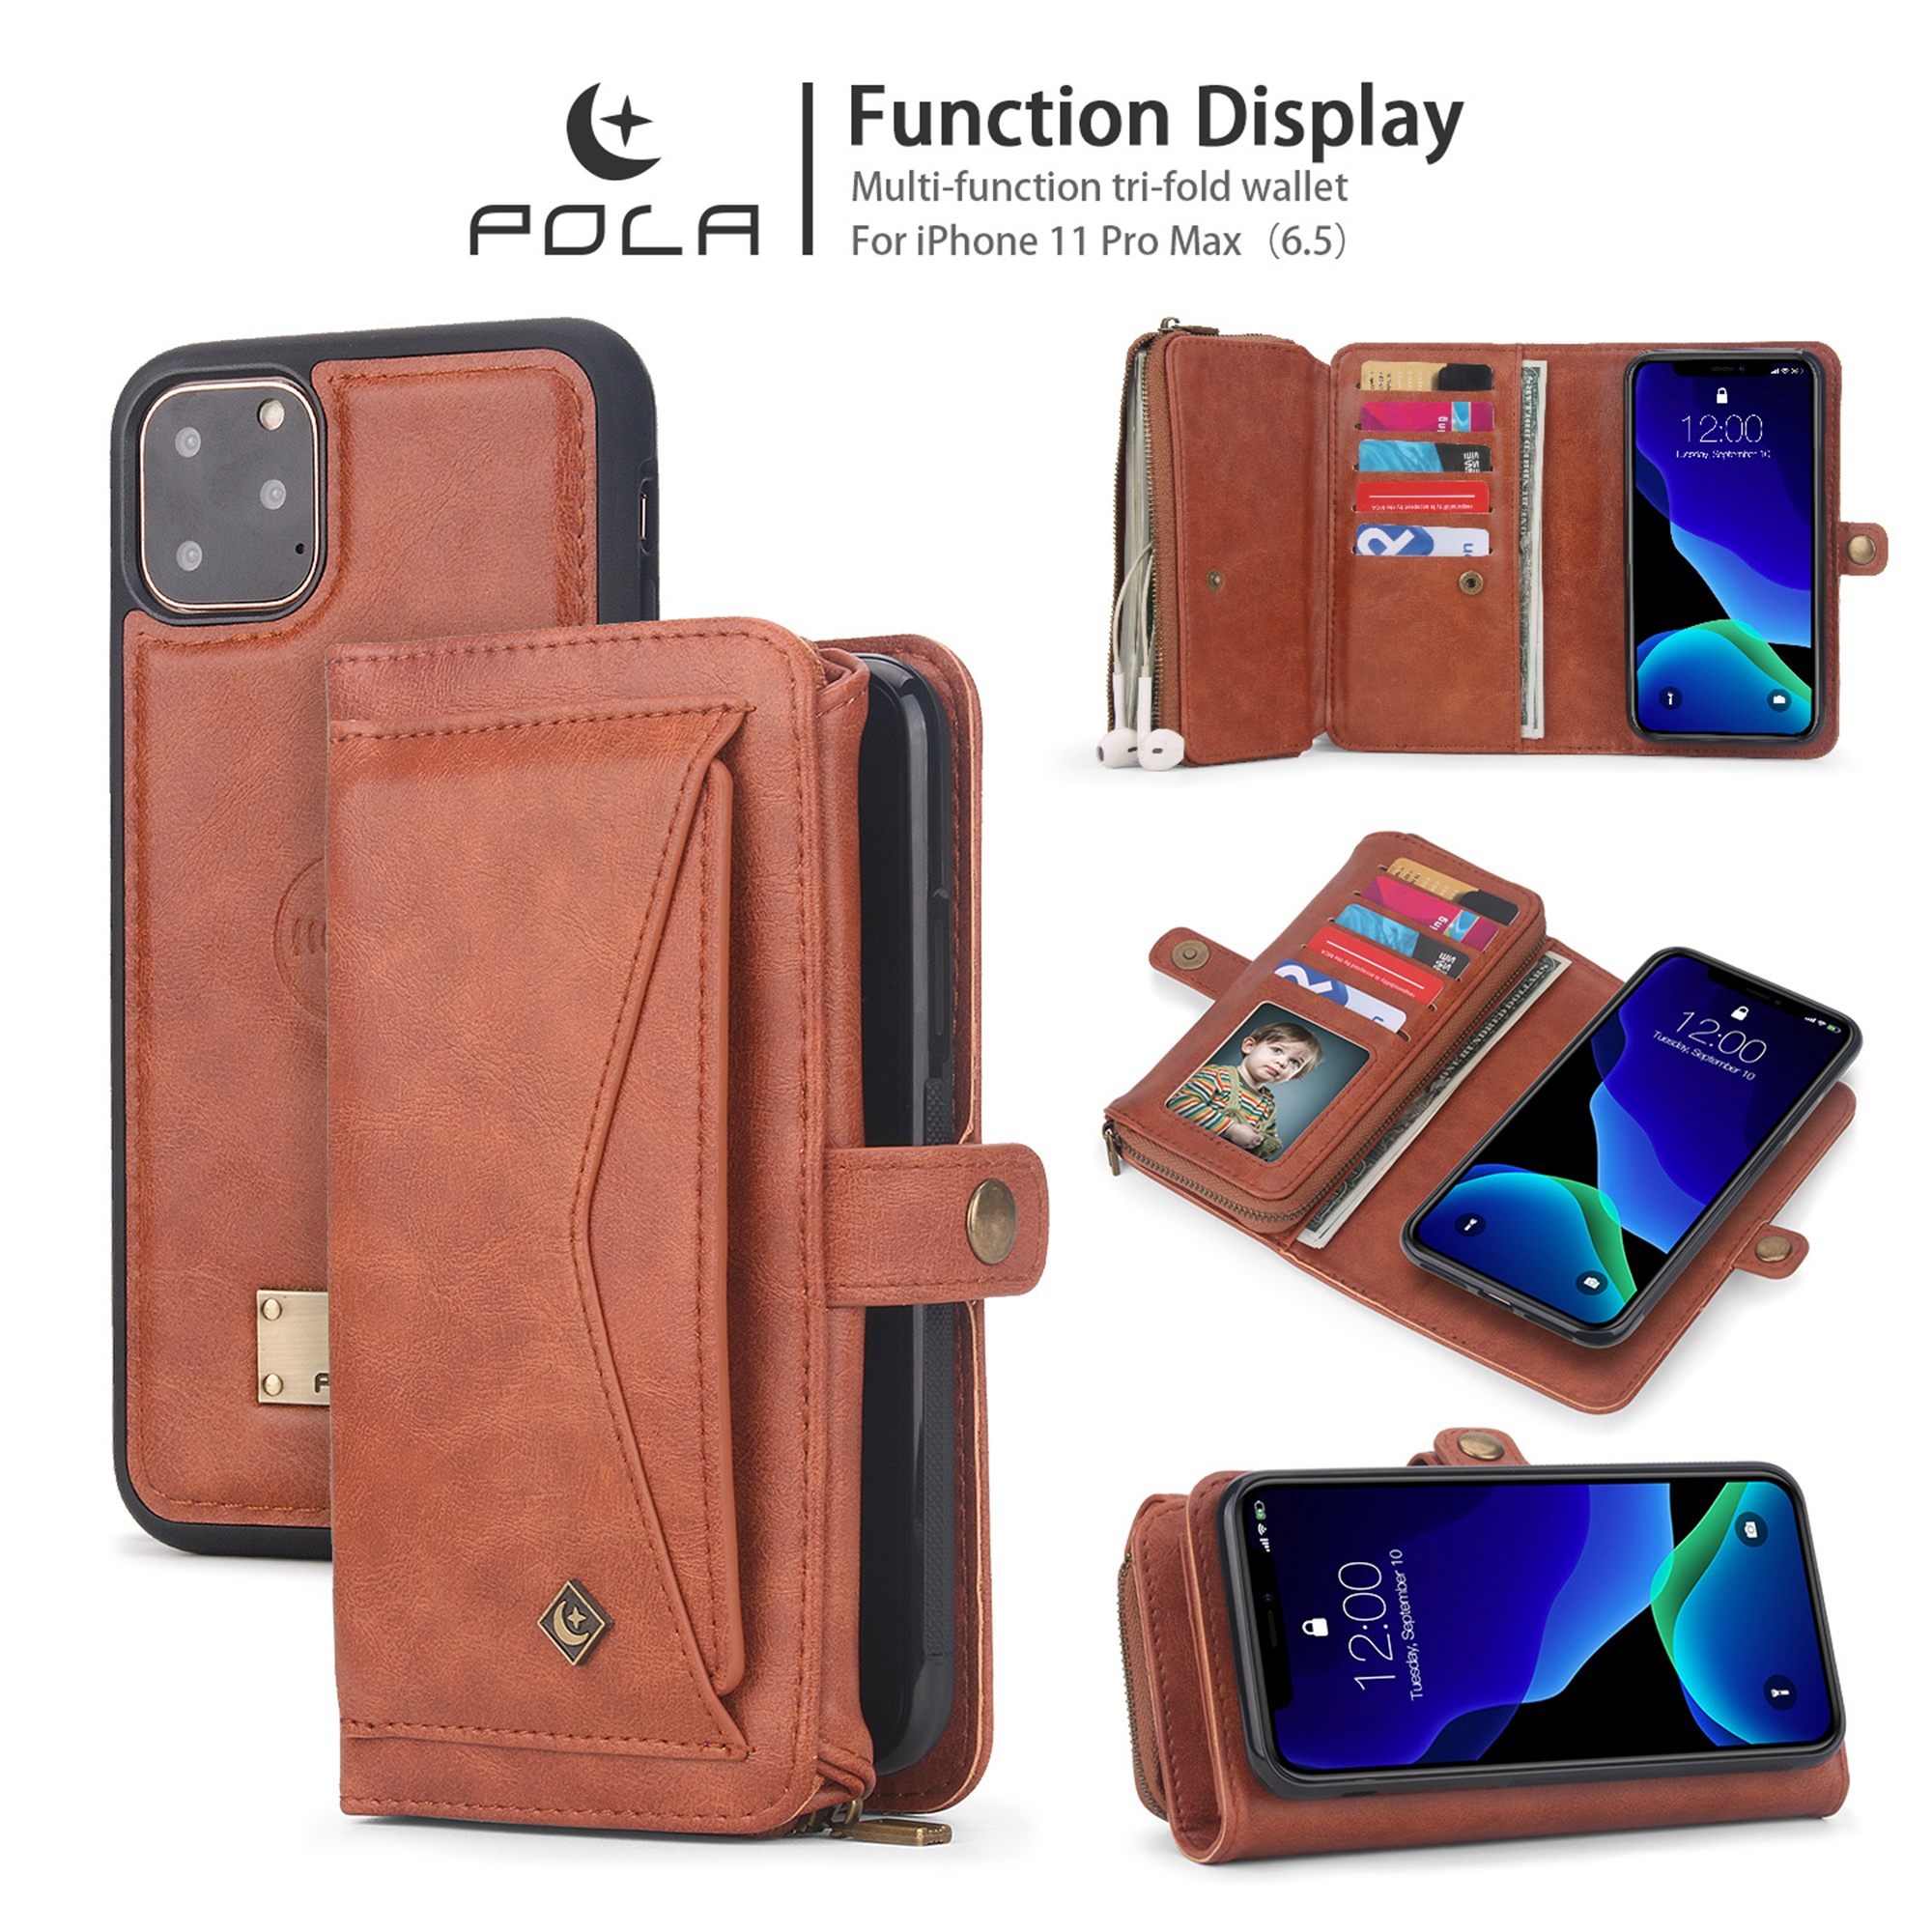 iPhone 11Pro 5.8 inch Wallet Case, Dteck 2 in 1 Leather Zipper Purse Multi-Function Tri-fold Wallet Case Detachable Magnetic Phone Cover with 14 Card Slots Money Pocket For iPhone 11 Pro,Brown - image 1 of 11